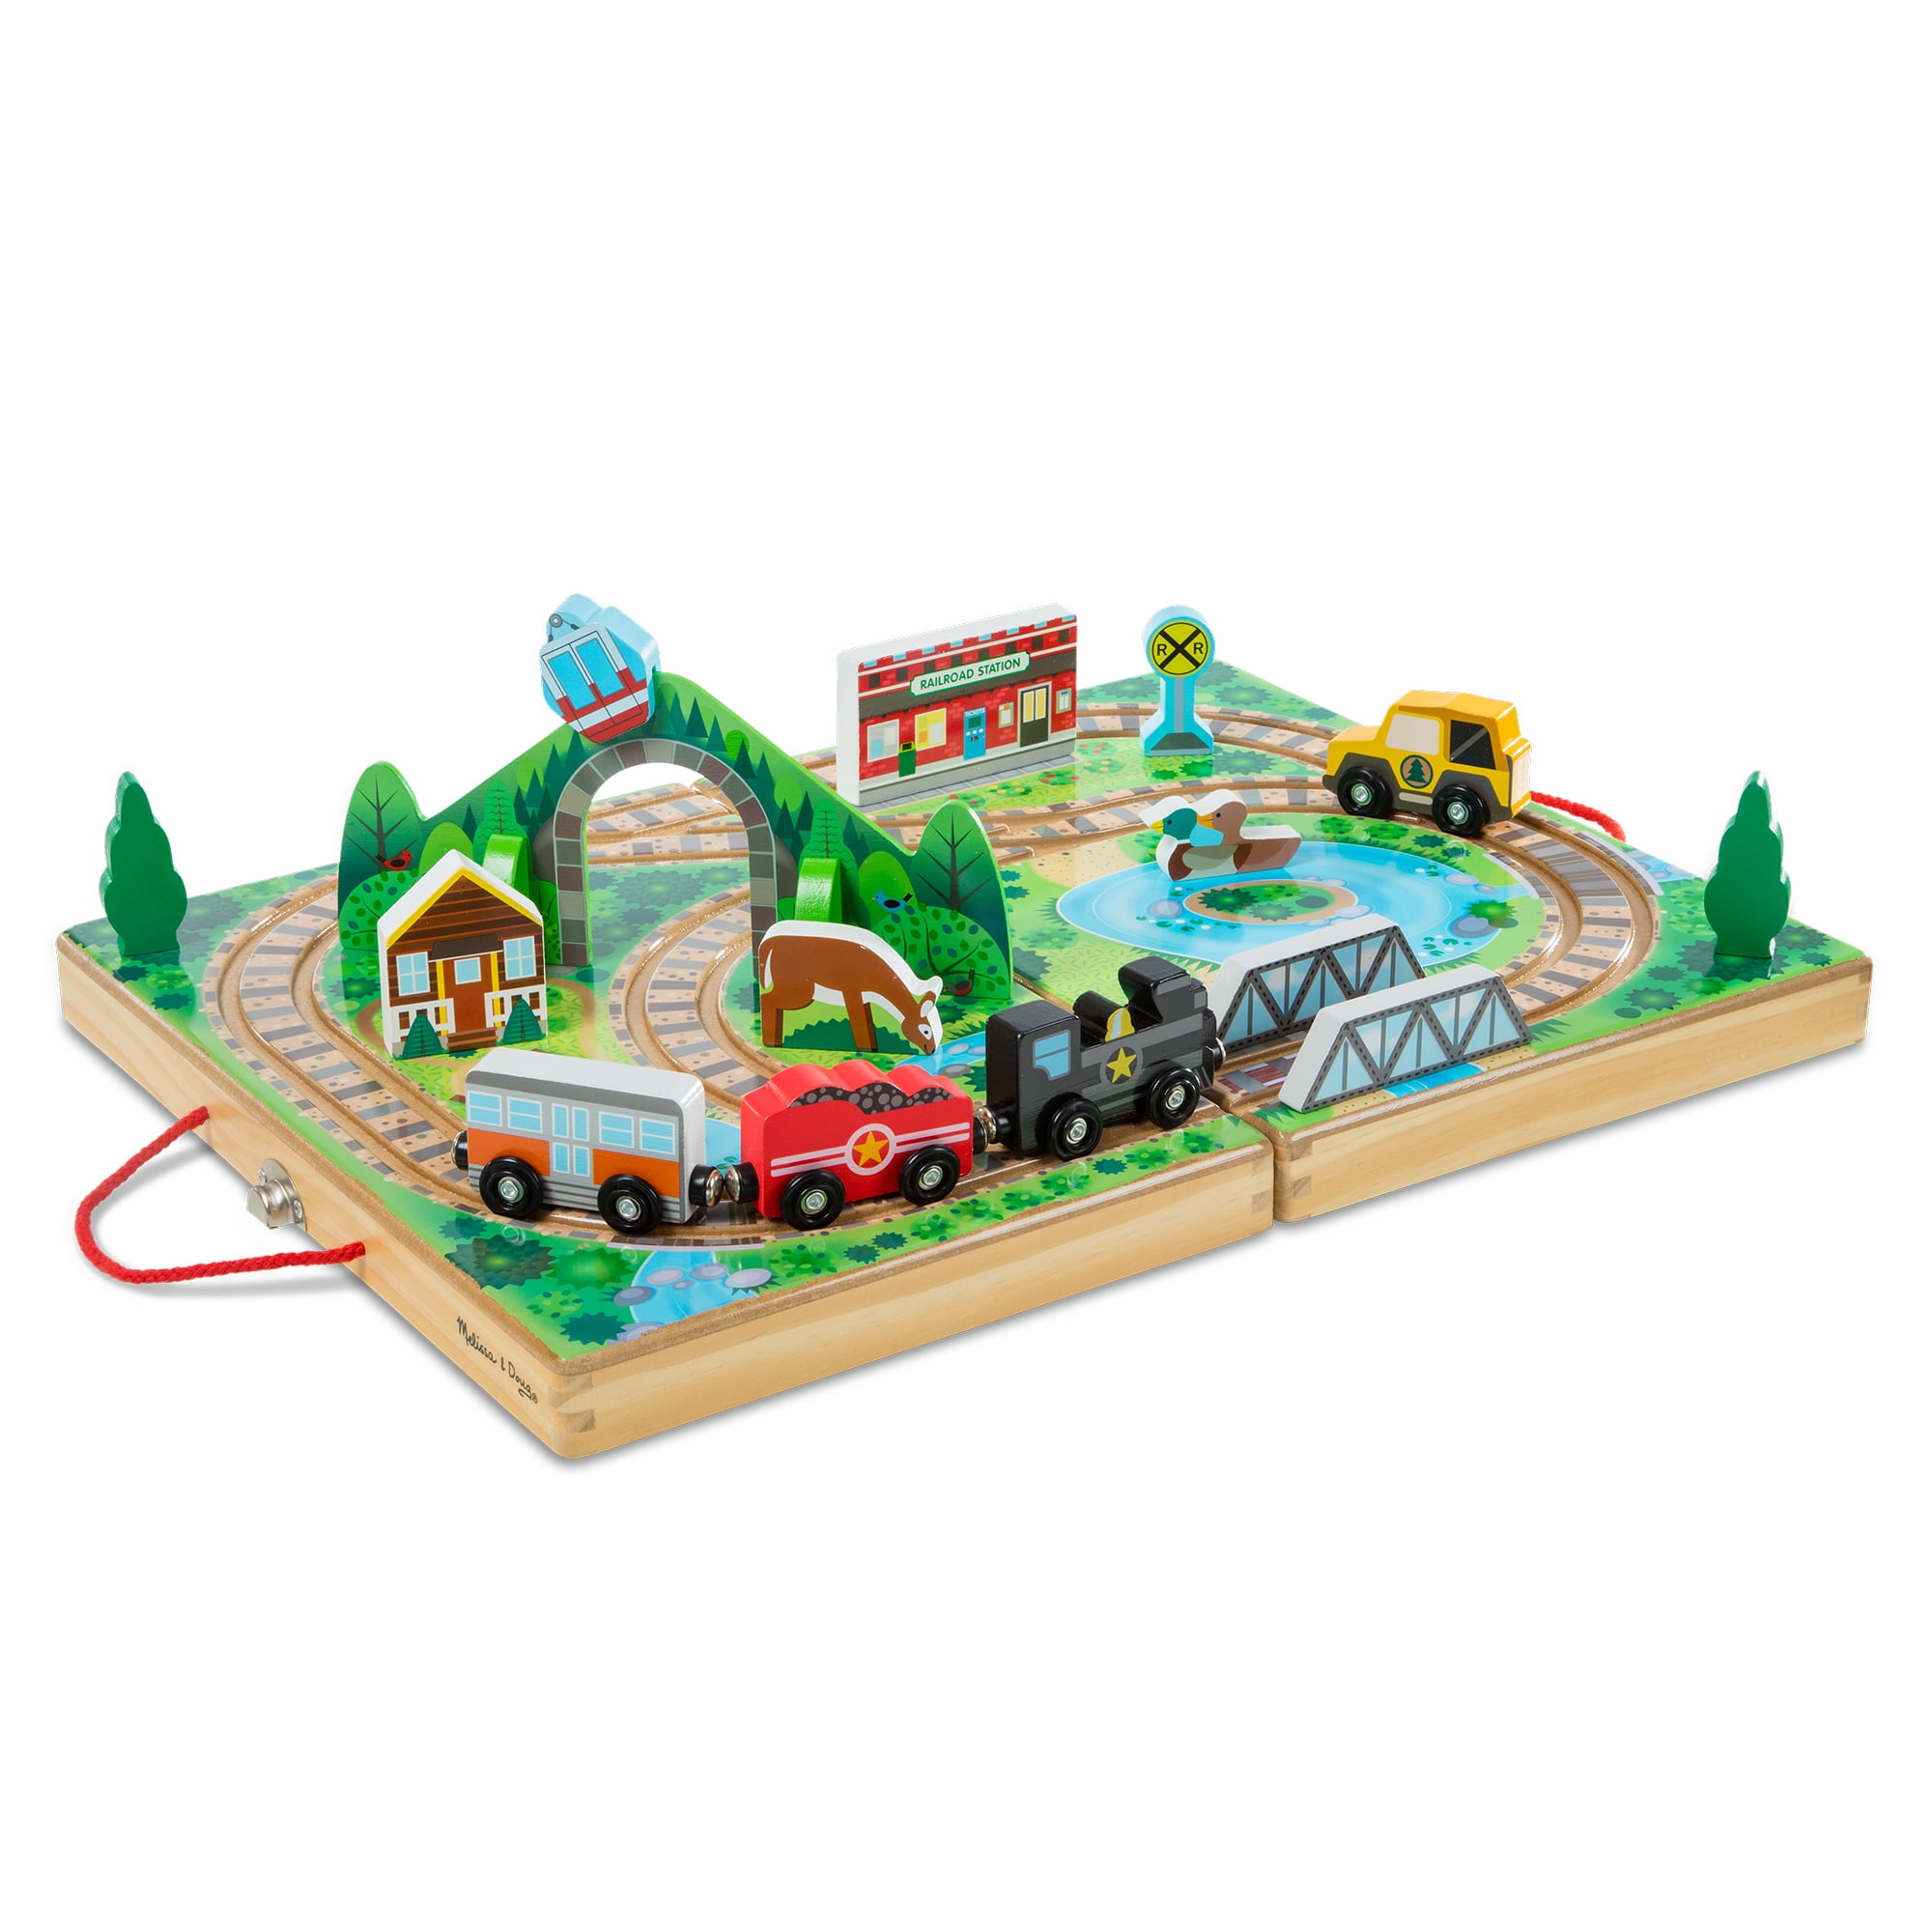 Melissa And Doug 17 Piece Wooden Take Along Tabletop Railroad 3 Trains